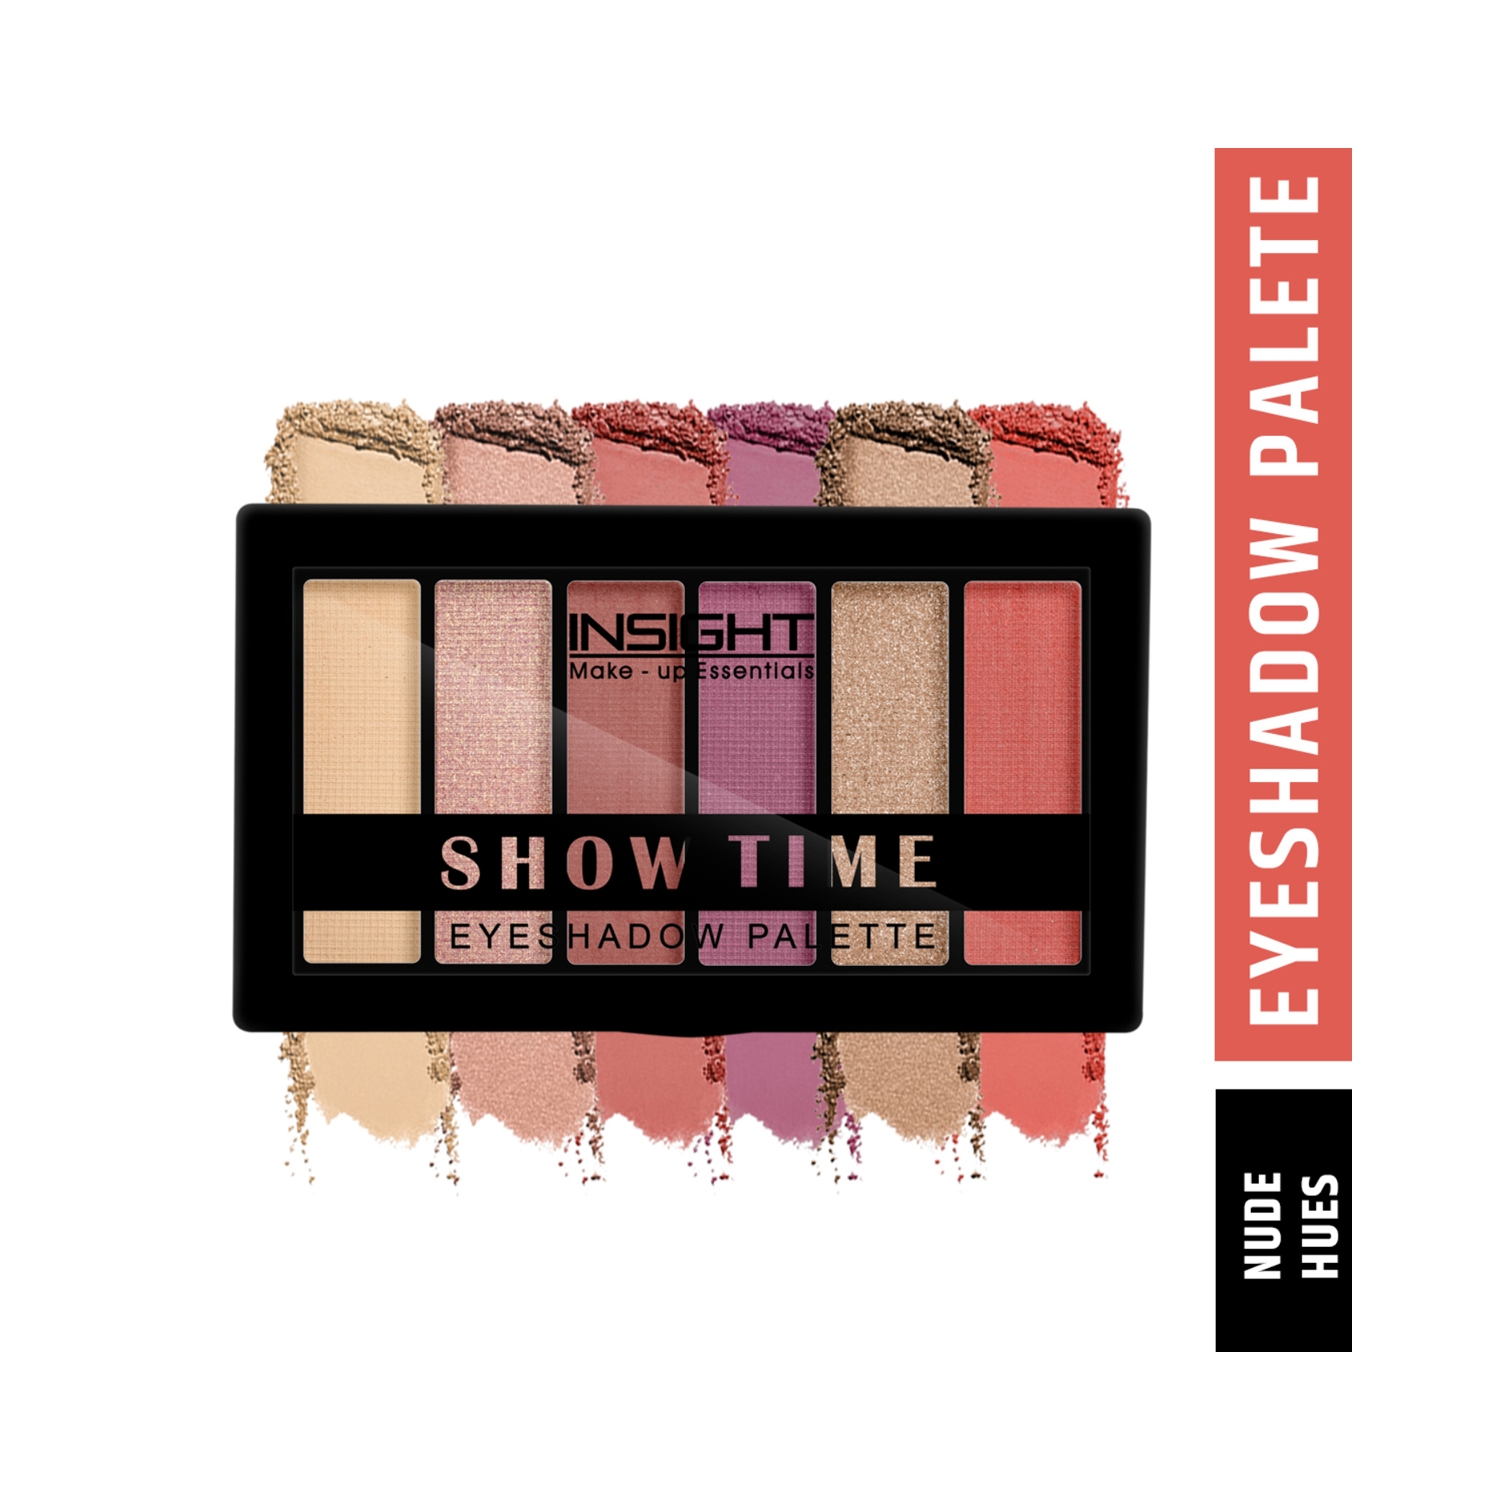 Insight Cosmetics | Insight Cosmetics Show Time Eyeshadow Palette - Nude Hues (15g)